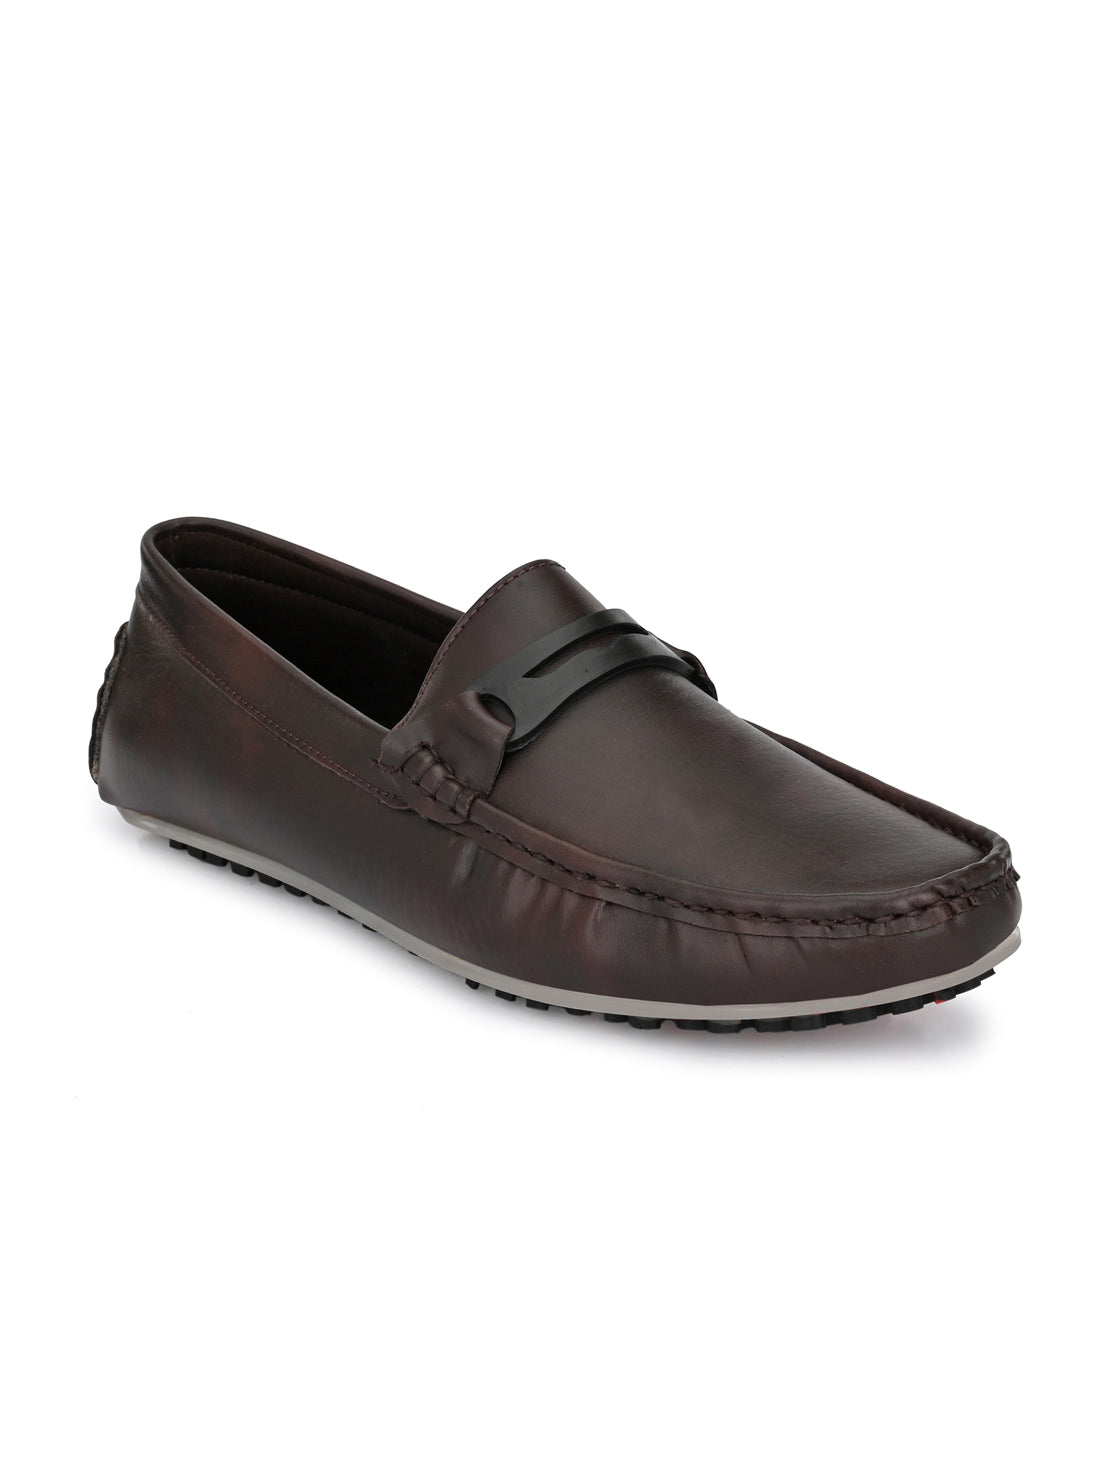 Guava Men's Brown Casual Slip On Driving Loafers (GV15JA764)